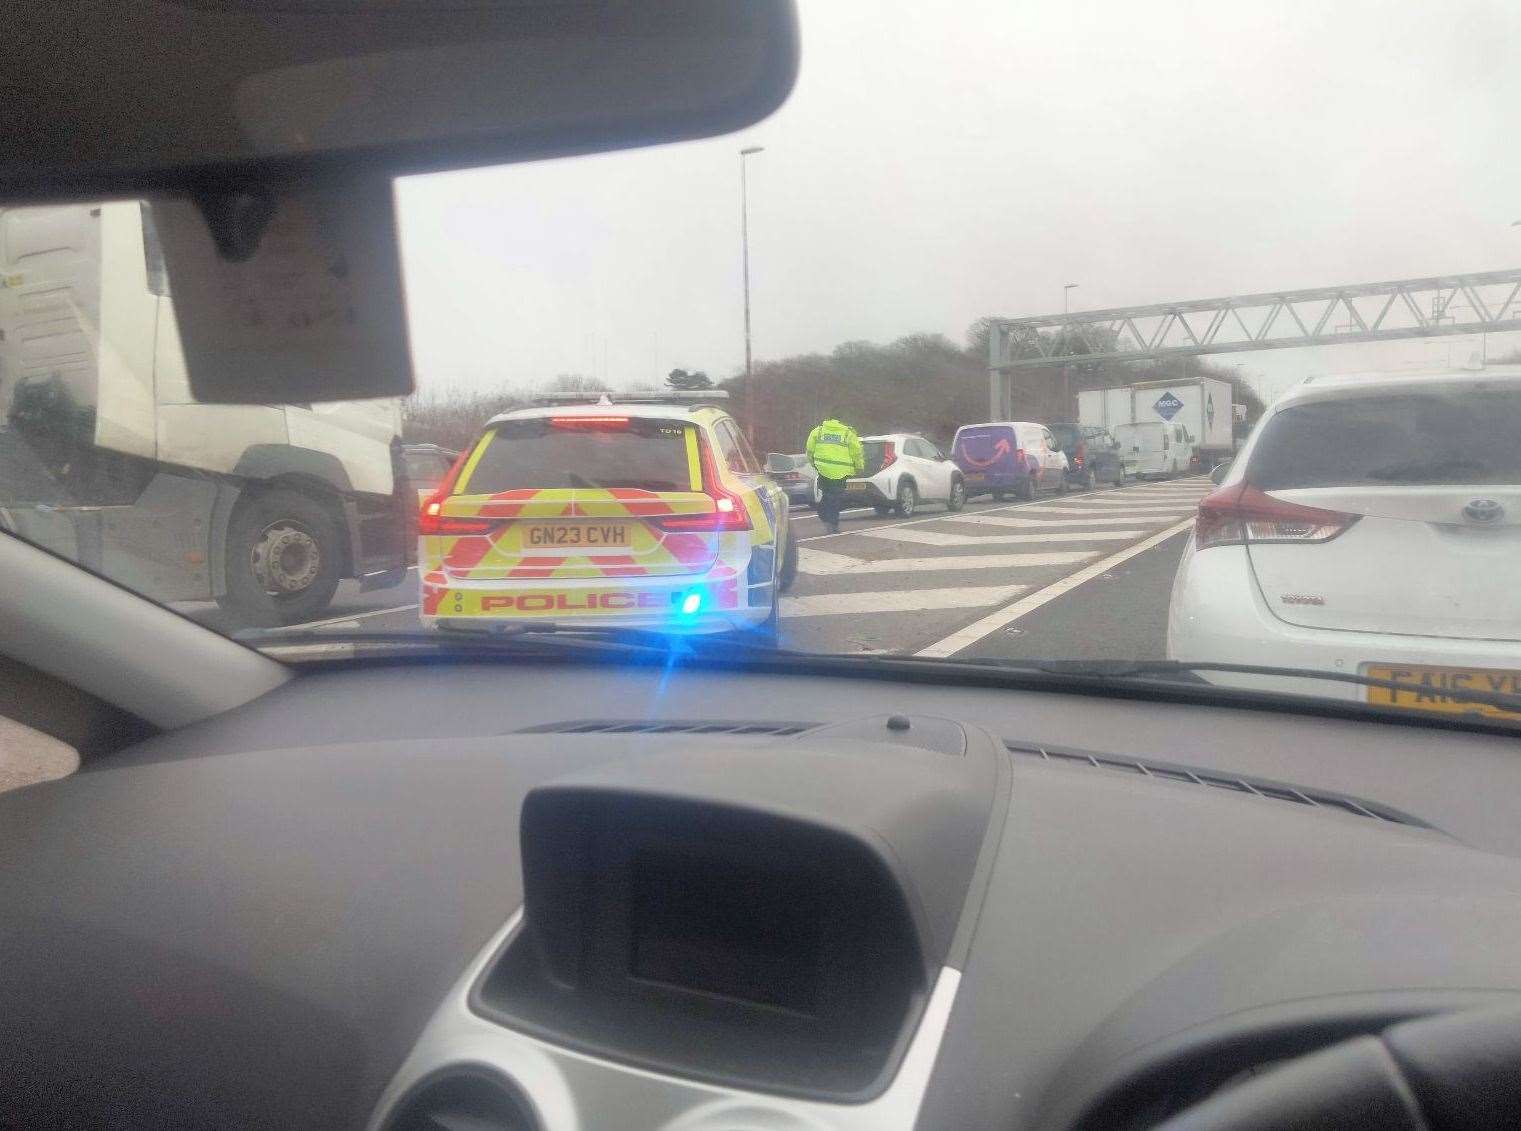 Police are at the scene on the A2